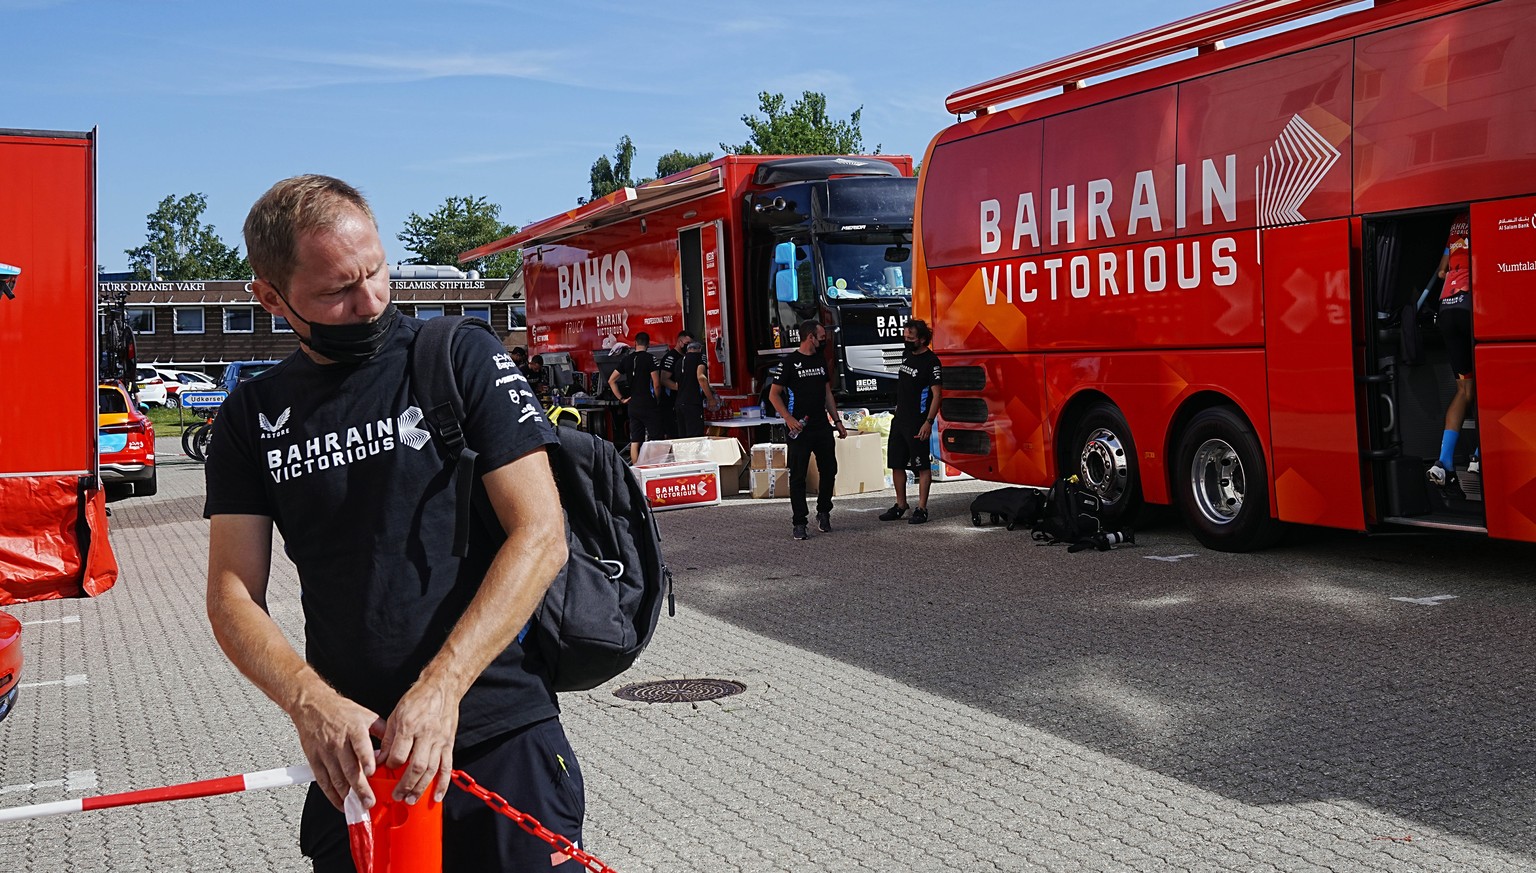 Bahrain Victorious staff outside their hotel in Glostrup, Denmark, Thursday, June 30, 2022. The Bahrain Victorious team at the Tour de France has been raided by police for the second time this week. D ...